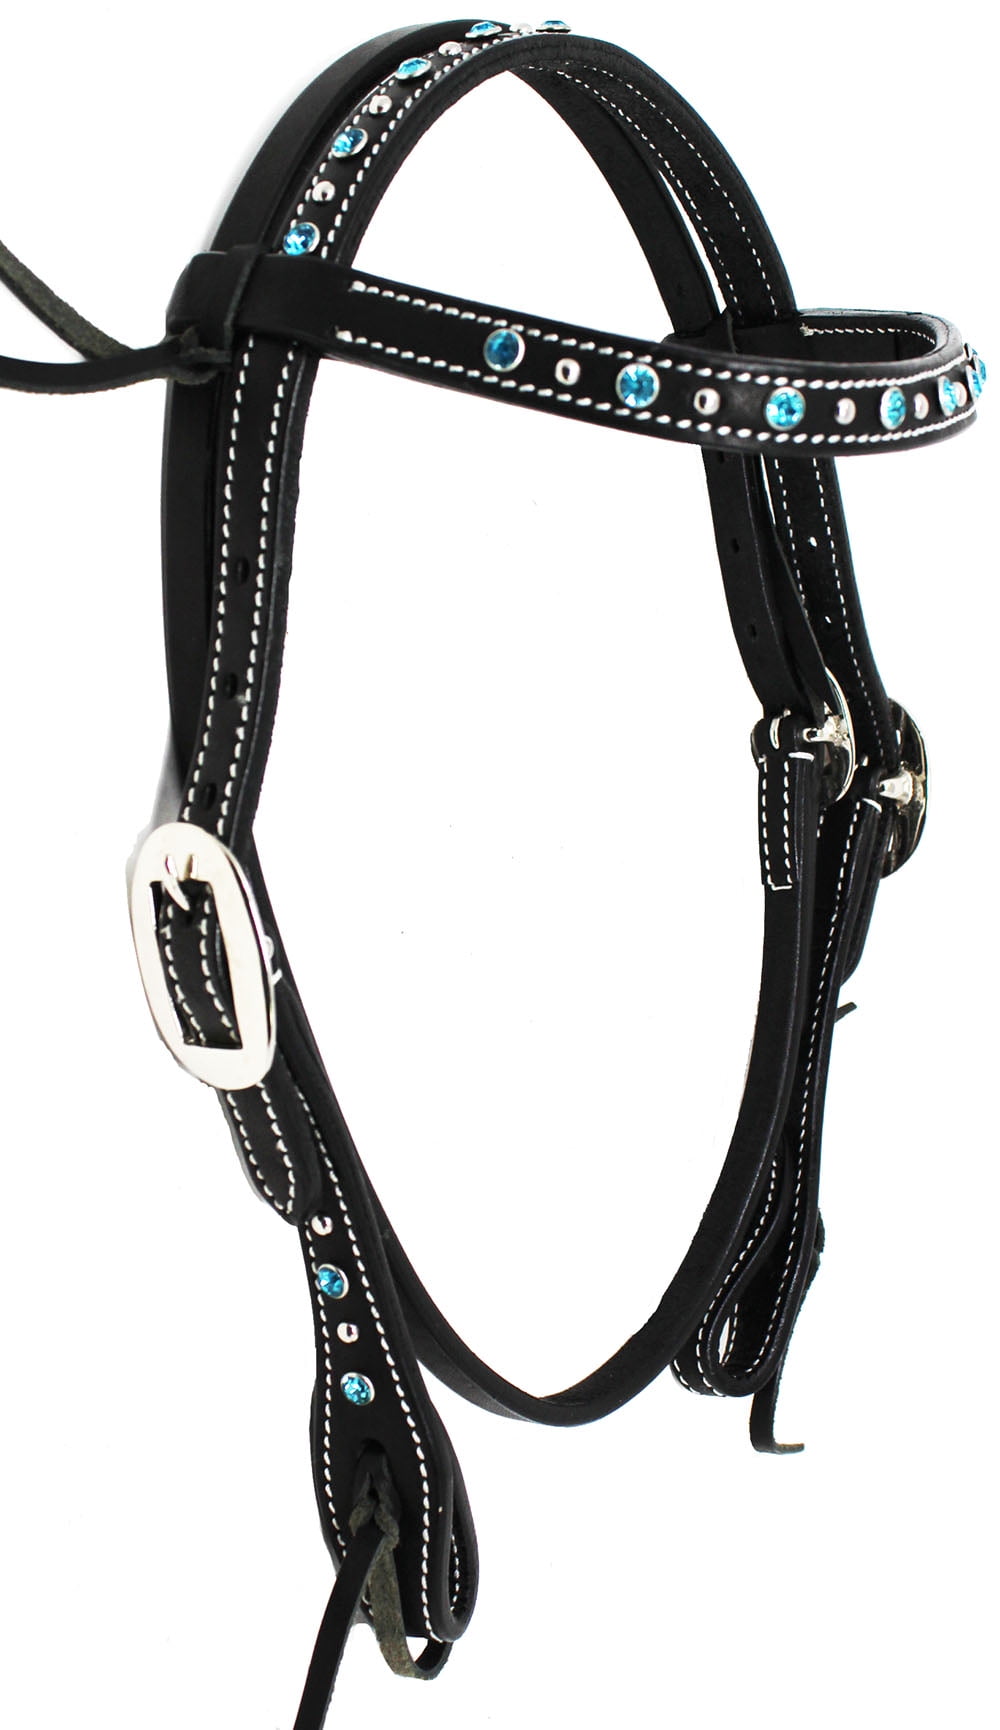 WESTERN SADDLE HORSE BLING SHOW RODEO BRIDLE HEADSTALL BLUE CRYSTAL RHINESTONES 